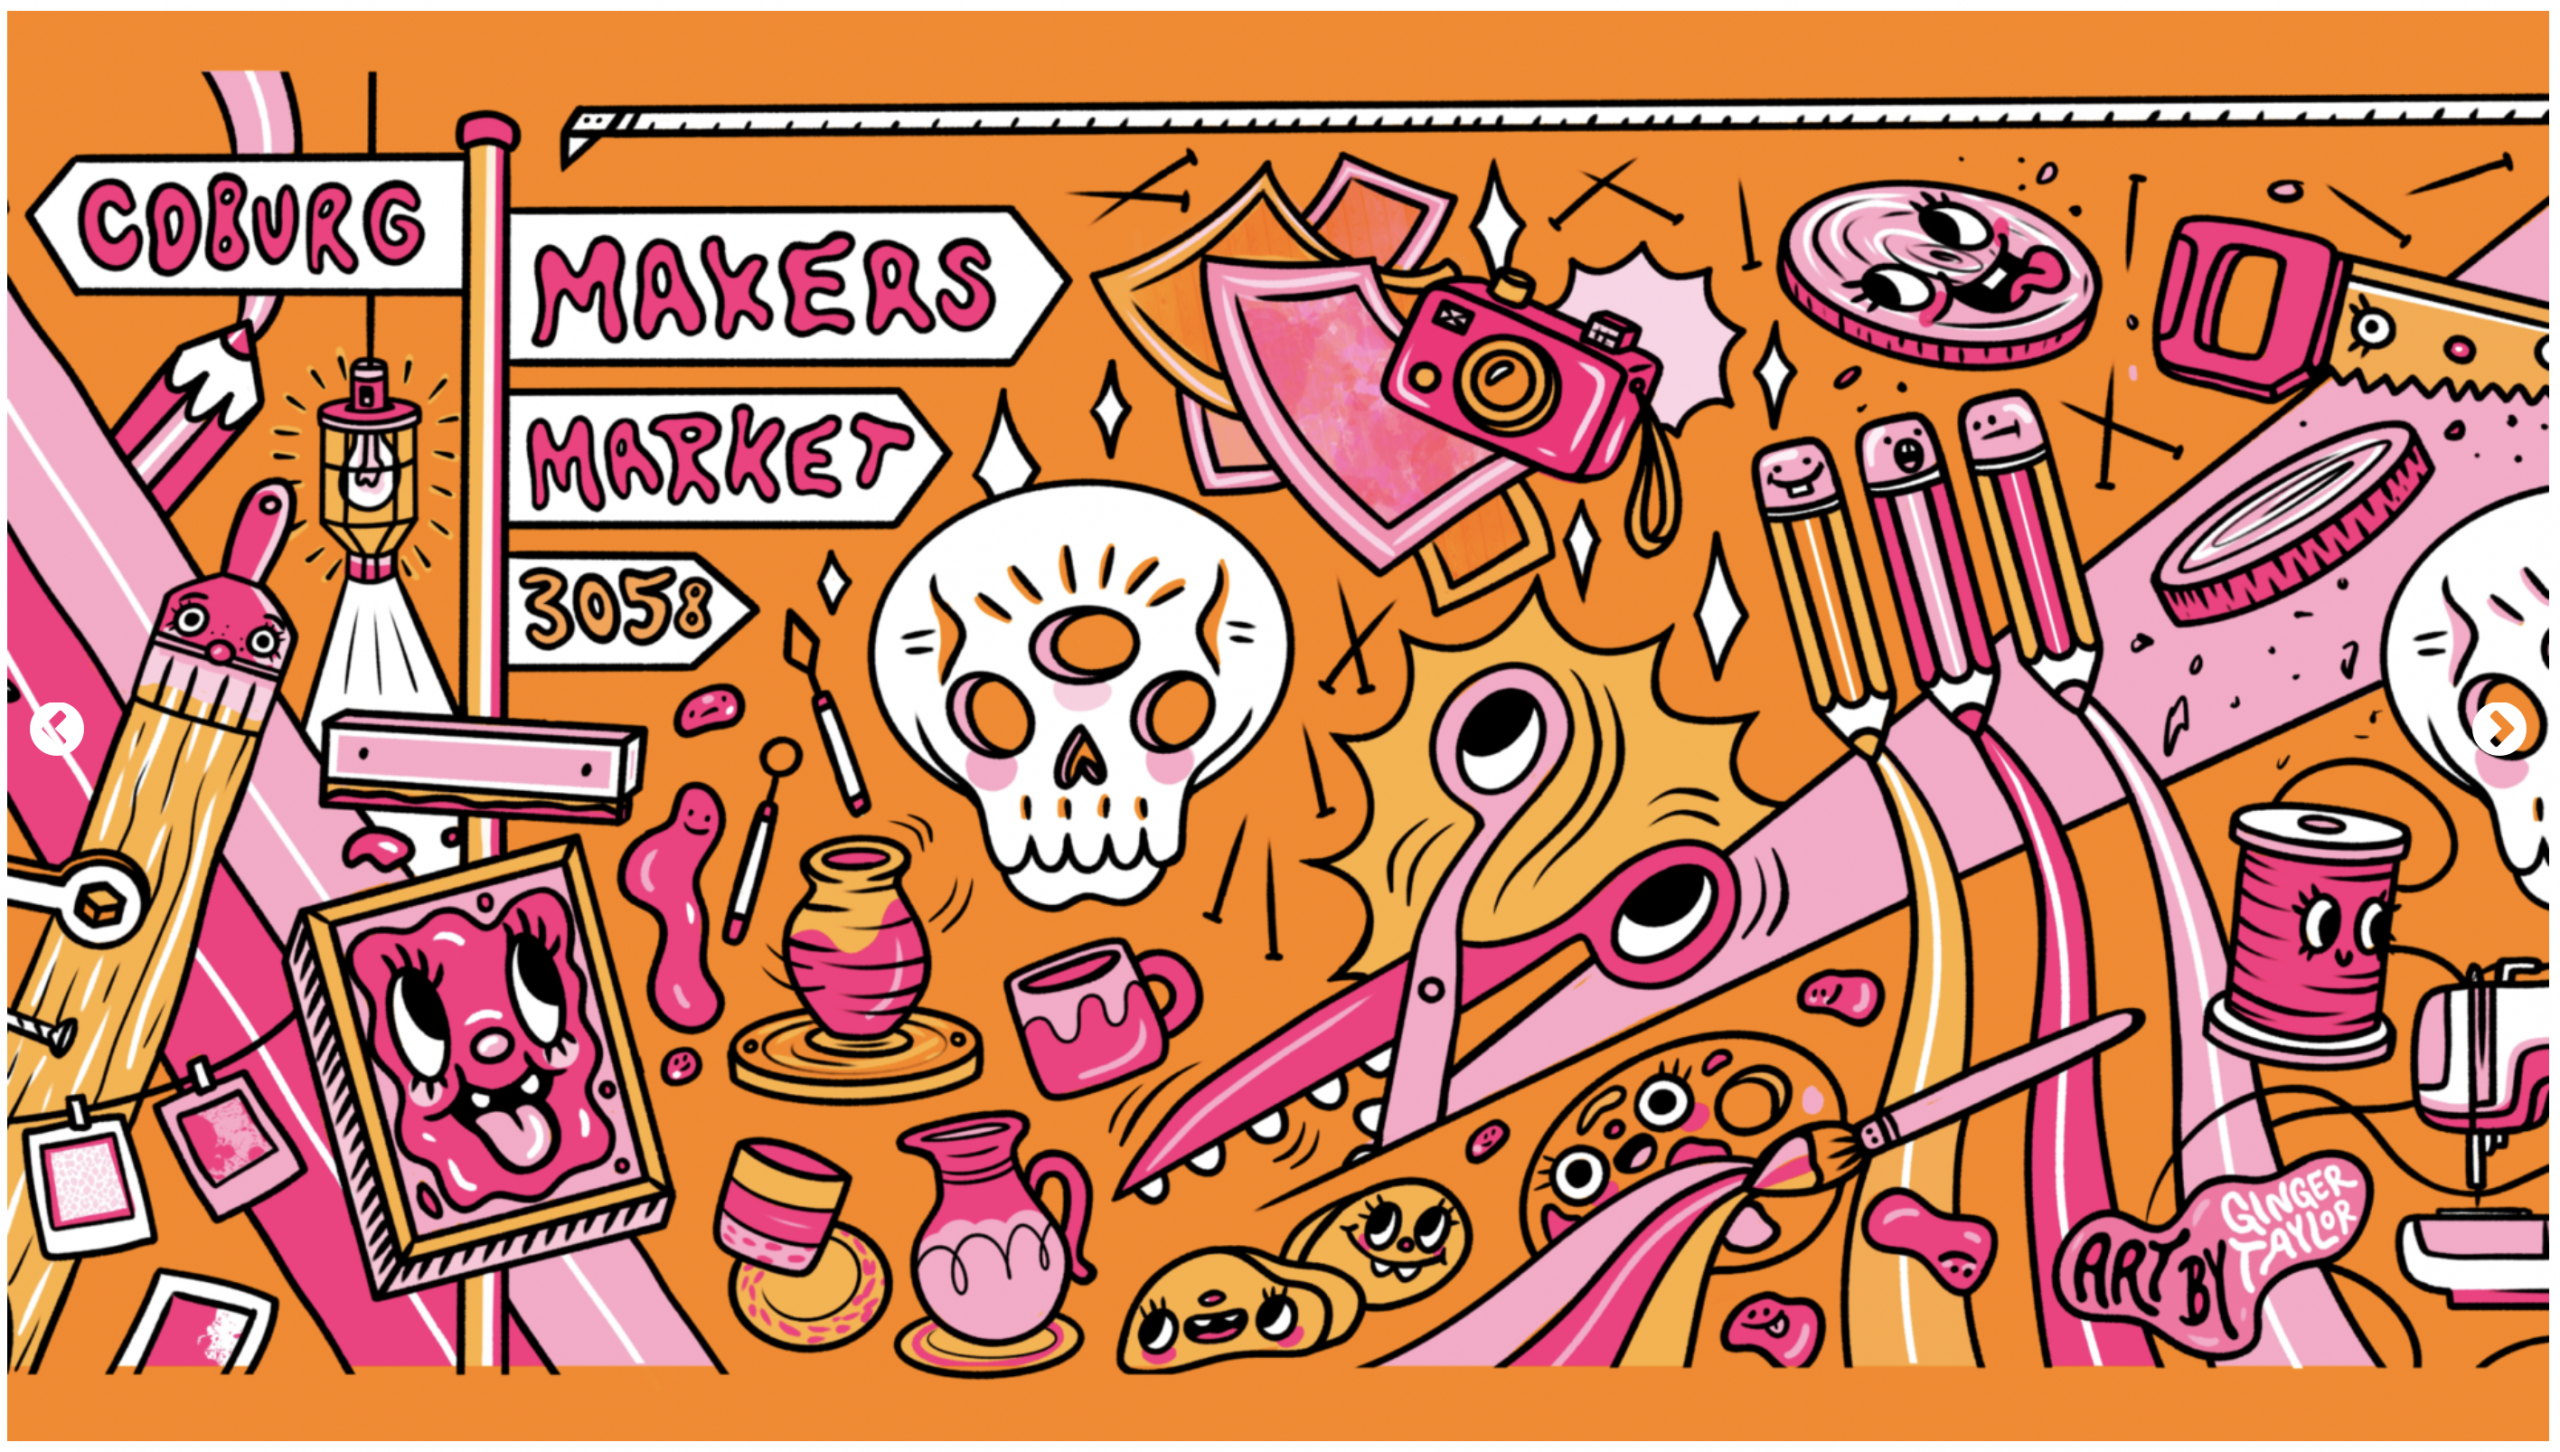 The images shows a colorful, cartoon style poster. The poster has a vibrant orange and pink background with various artist elements scattered throughout. Key elements include: - A large skull in the center with a playful expression. - Paintbrushes, paint tubes, and a palette. - A sewing machine and thread and spools. - A framed picture with a face. - A banner that reads 